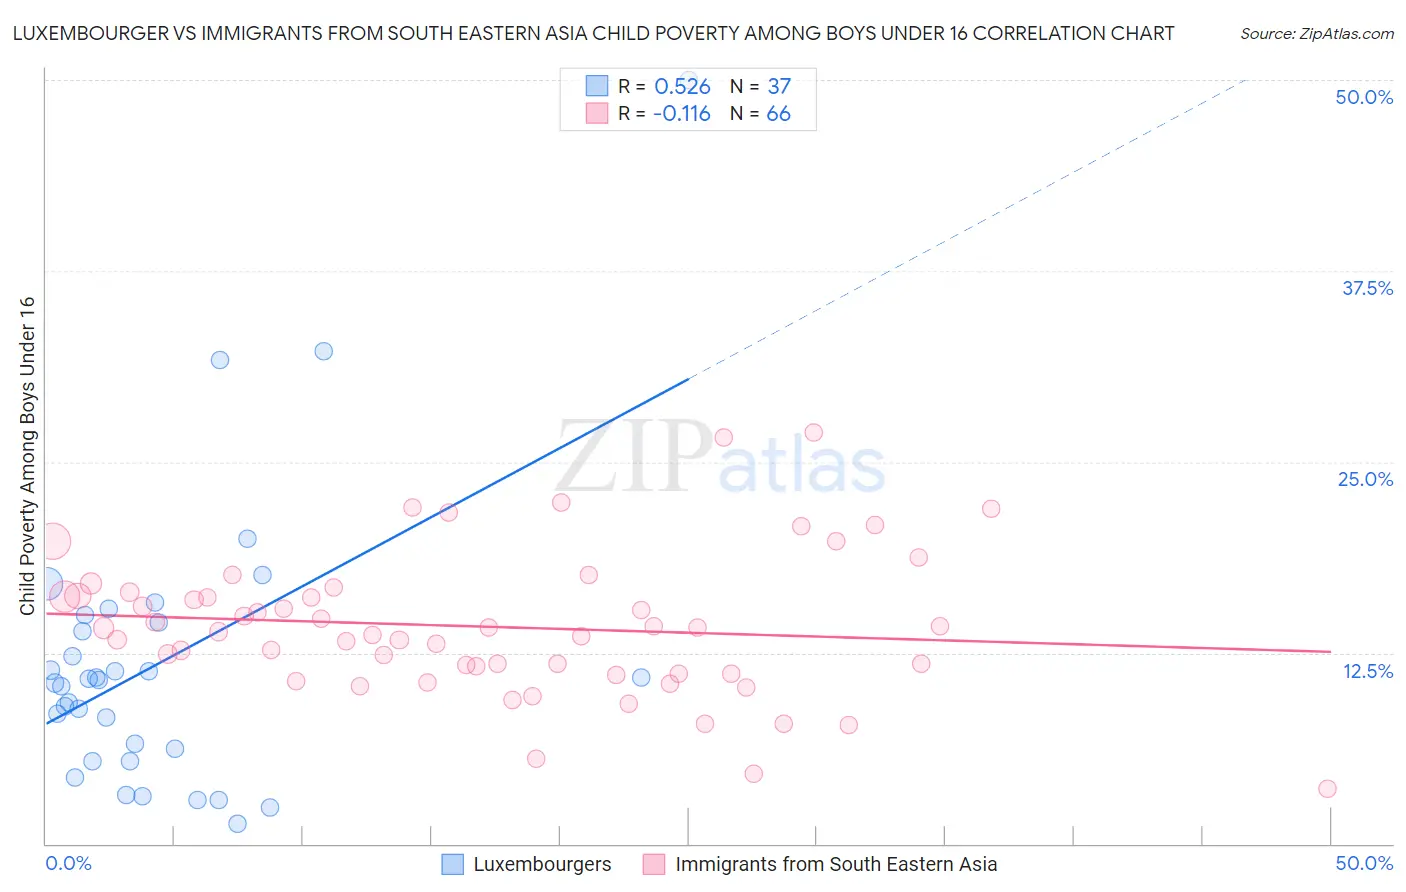 Luxembourger vs Immigrants from South Eastern Asia Child Poverty Among Boys Under 16